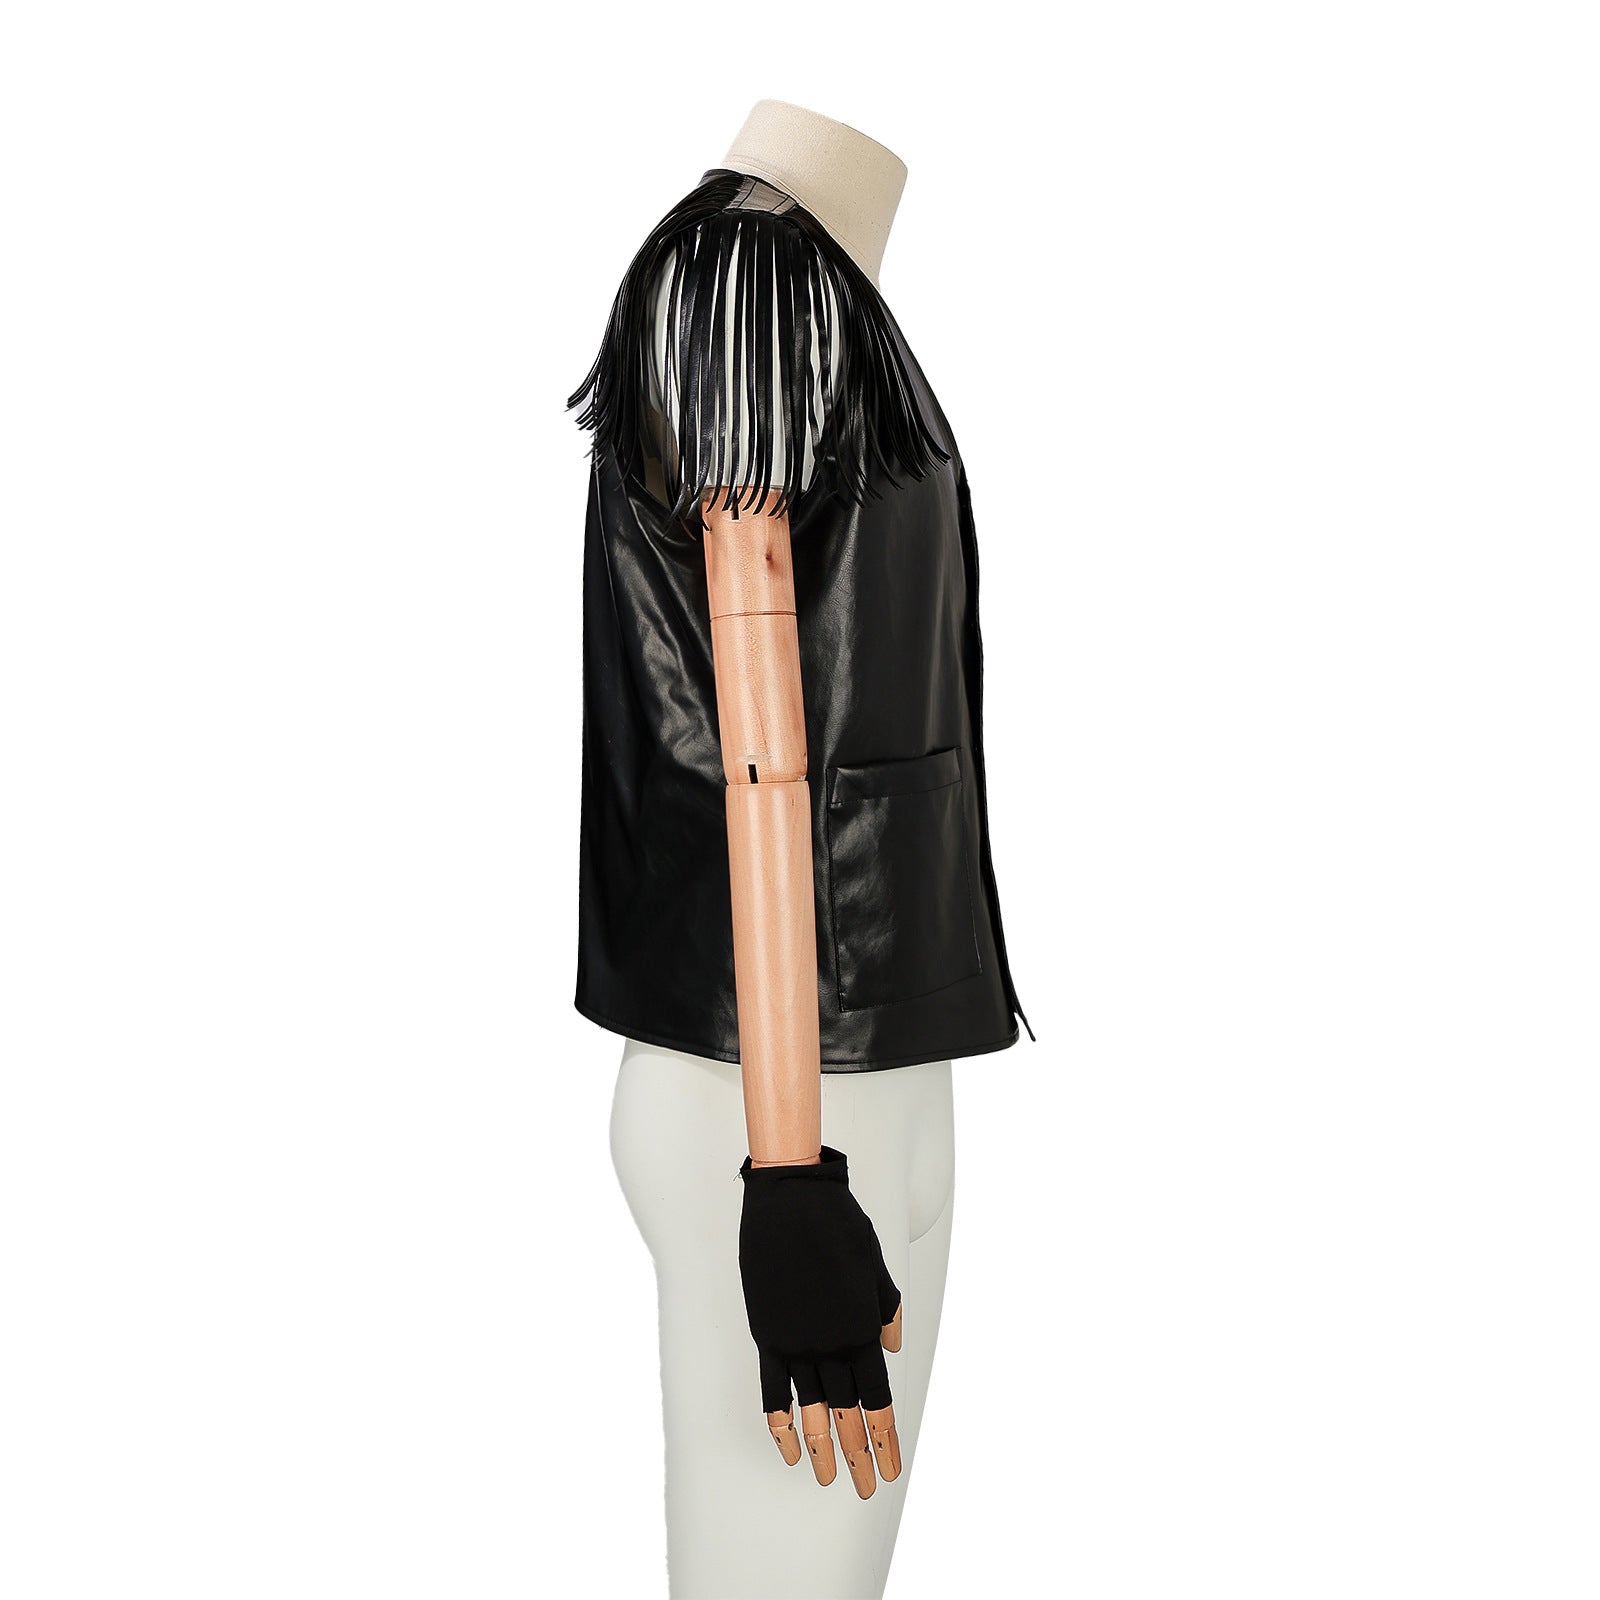 A side view of a mannequin wearing the Maramalive™ European Retro Vest For Men paired with white pants and black fingerless gloves, delivering a touch of Harajuku style.